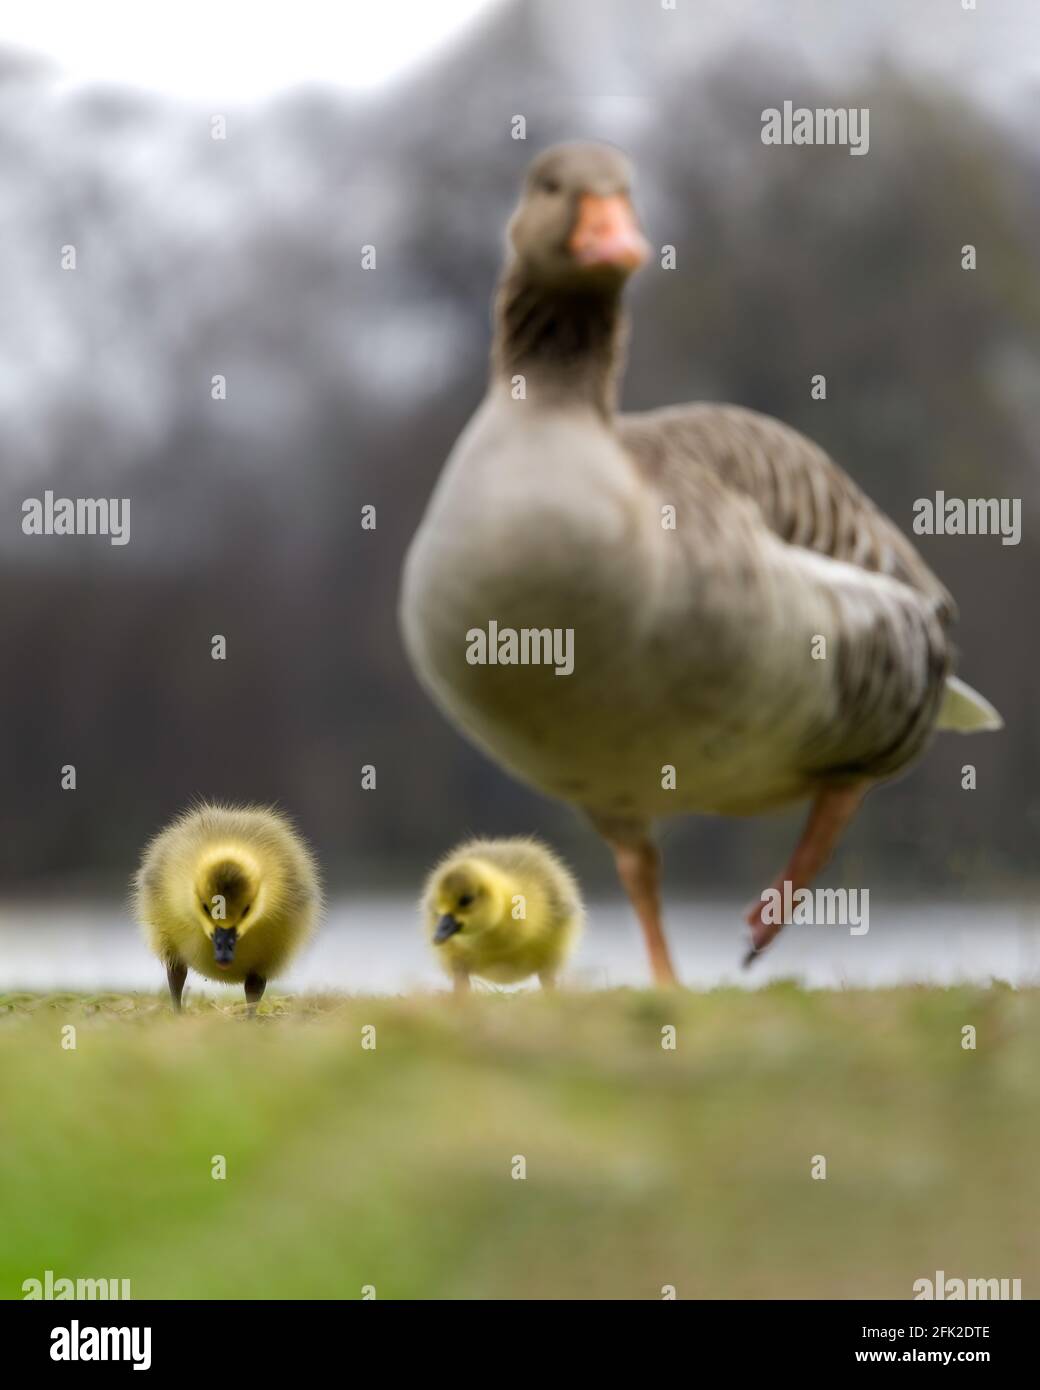 bird, animal, goose, baby, gosling, grass, nature, wildlife, cute, young, geese, wild, spring, yellow, small, fluffy, green, chick, little, birds, mea Stock Photo